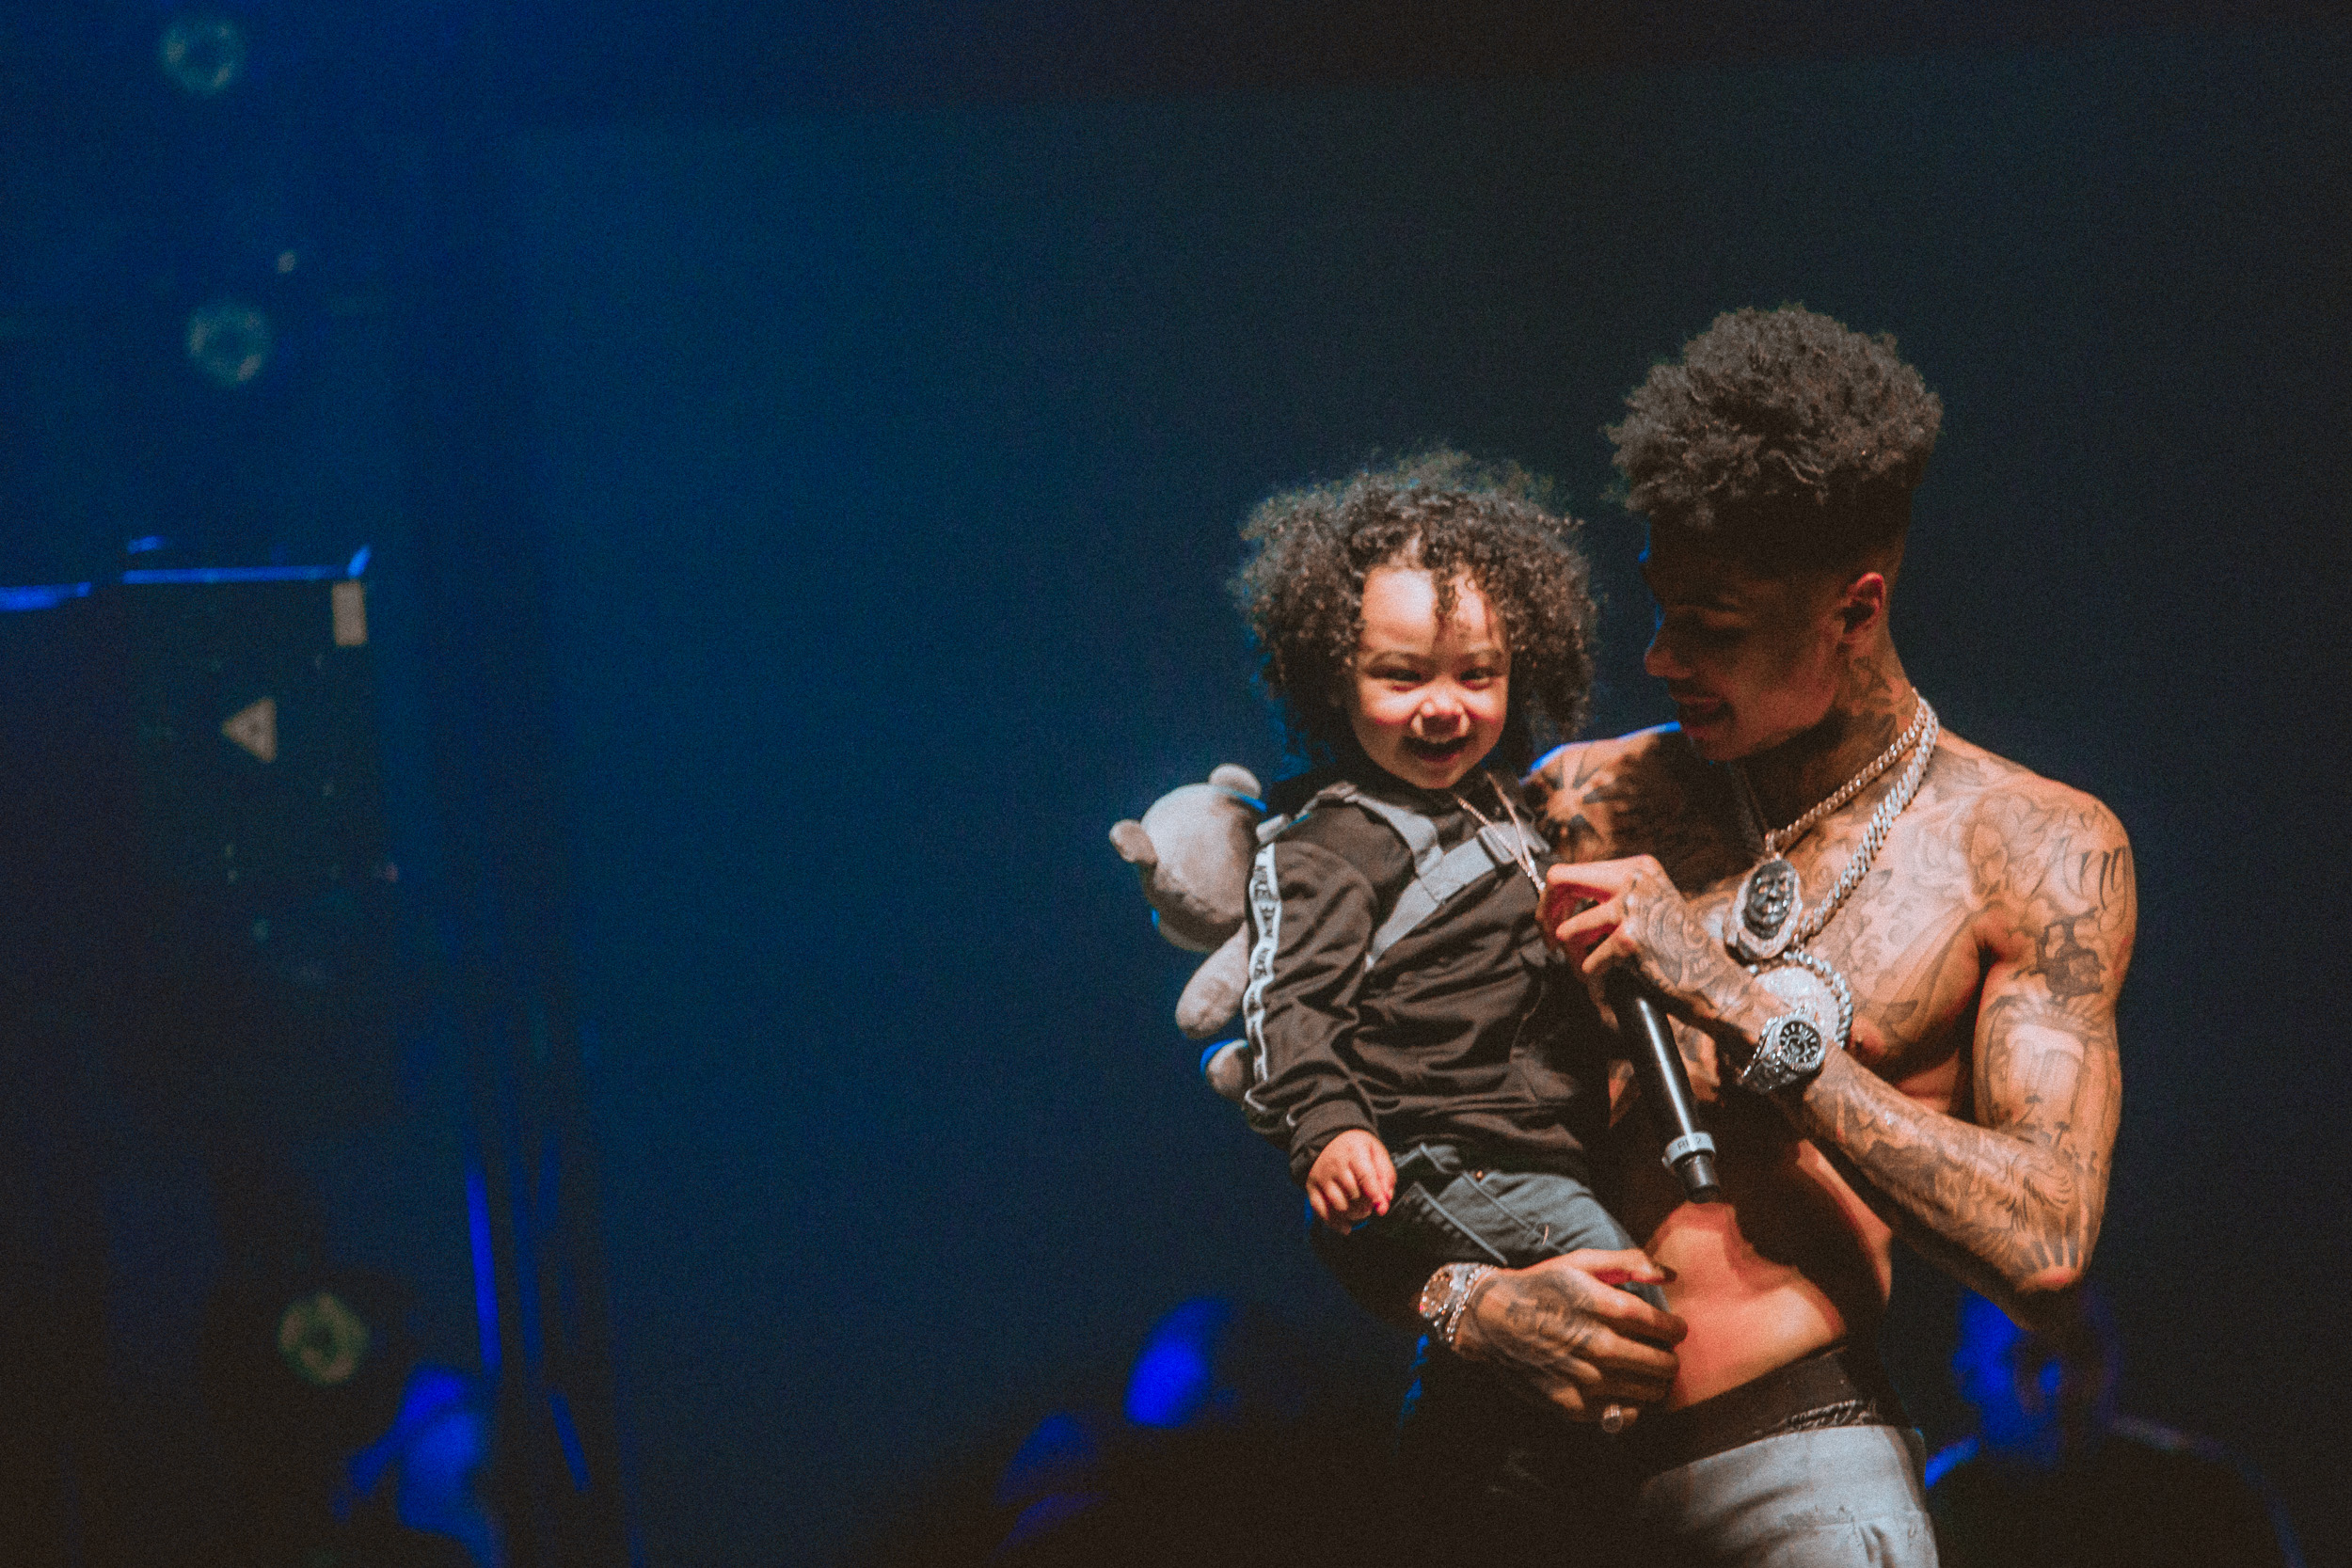 PHOTO GALLERY: The New Generation Tour w/ Lil Baby, City Girls, Blueface, J...